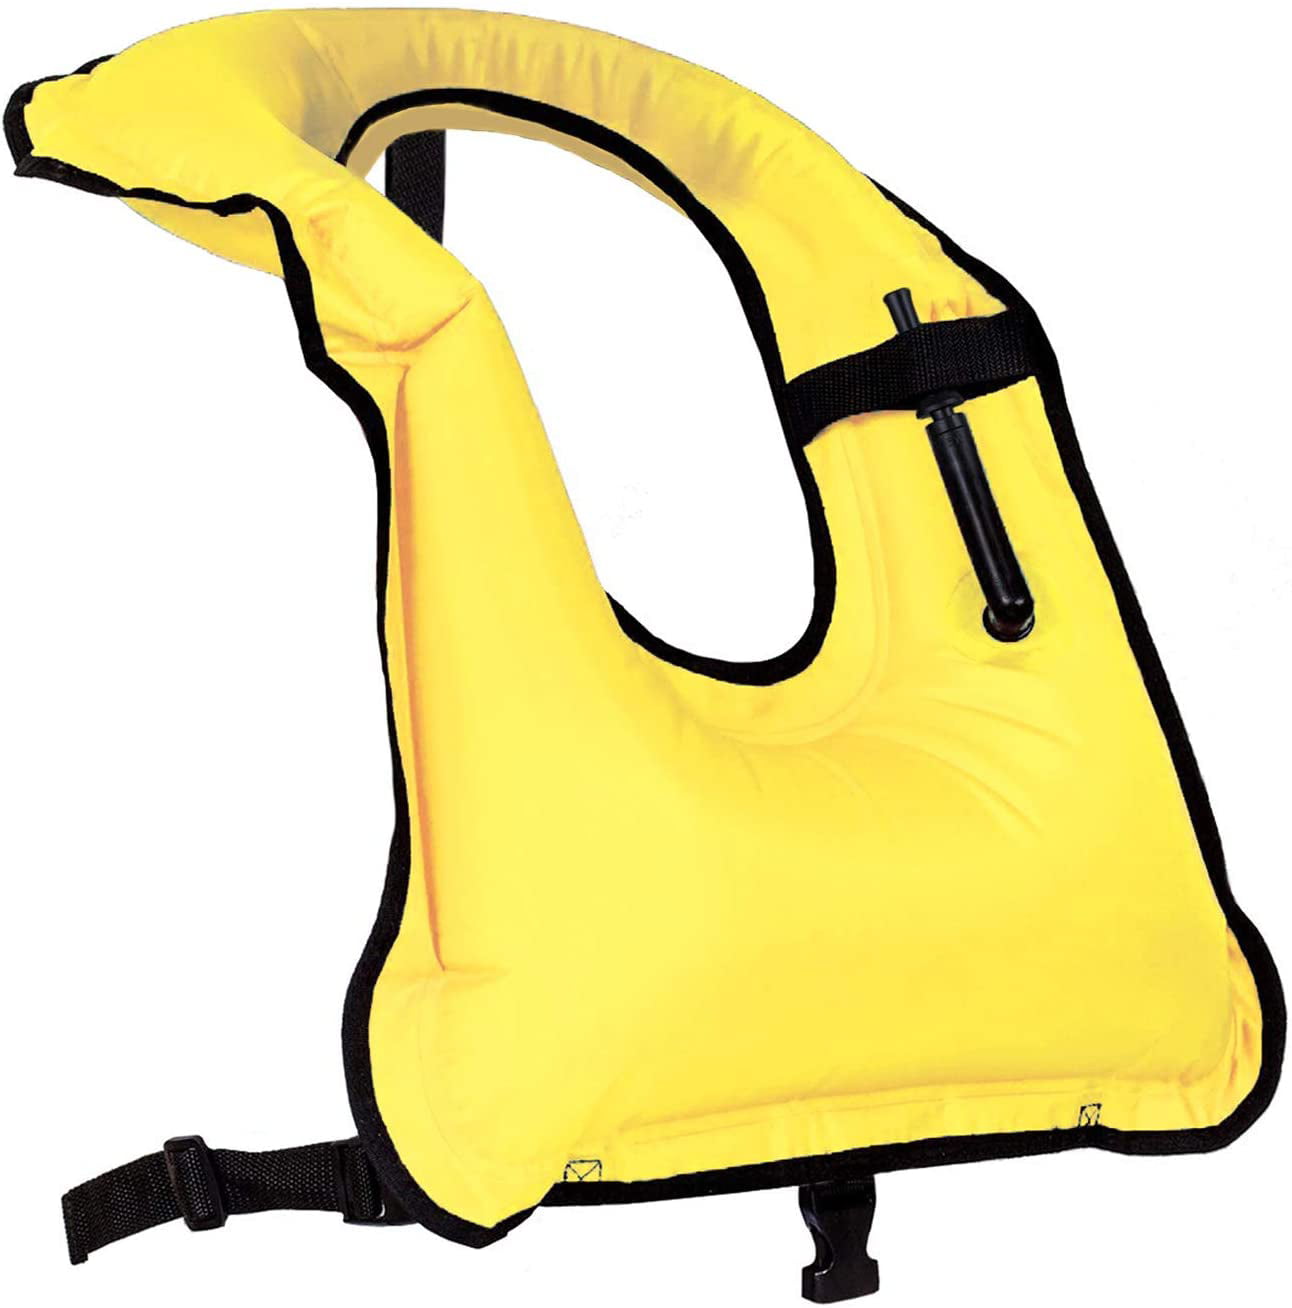 2 Pack Inflatable Snorkel Vests w/ Zipper Adult and Adult XL Yellow 